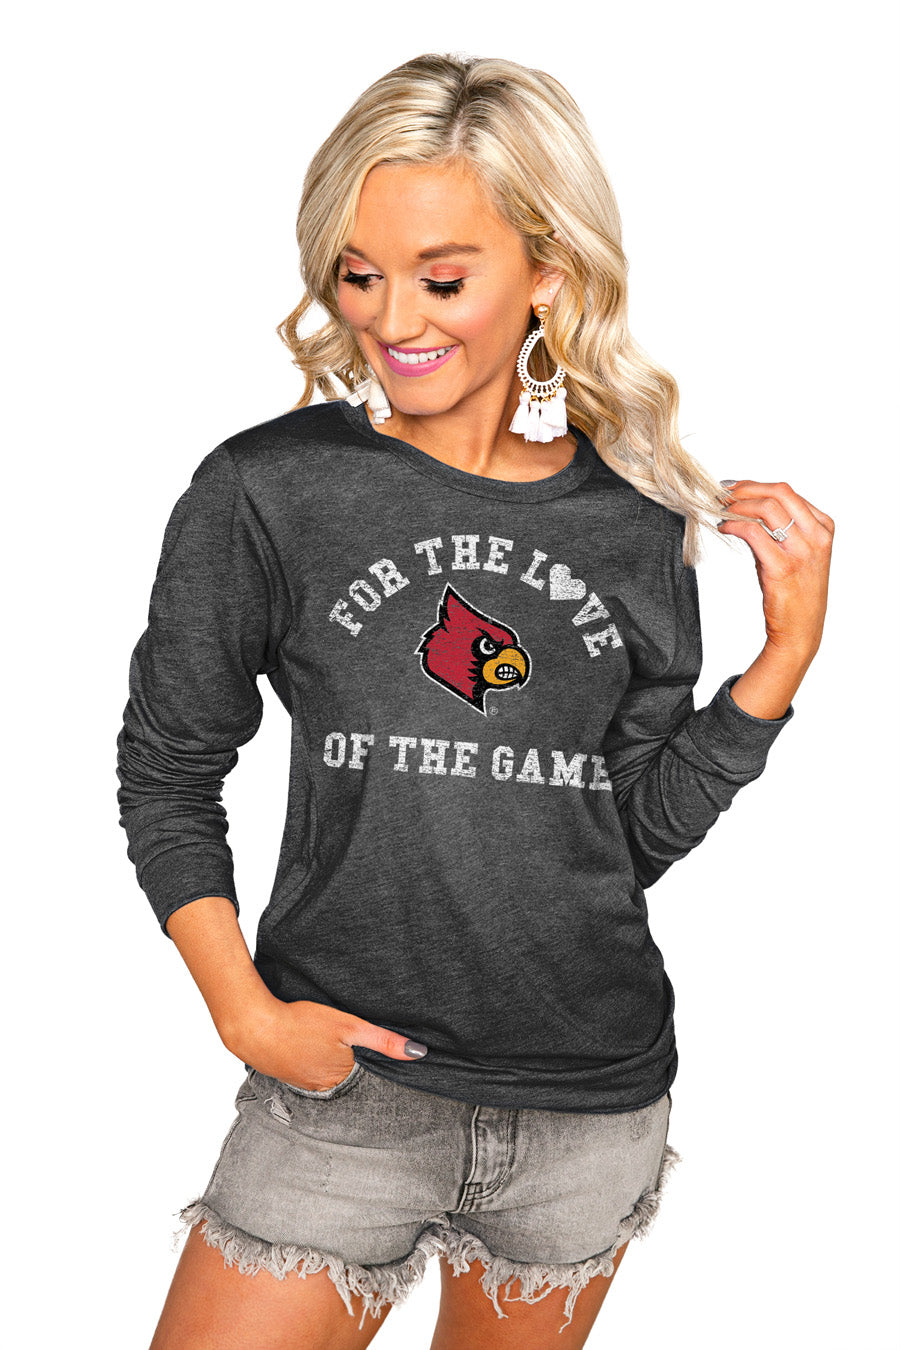 Women's Gameday Couture White Louisville Cardinals Boyfriend Fit Long Sleeve T-Shirt Size: Small